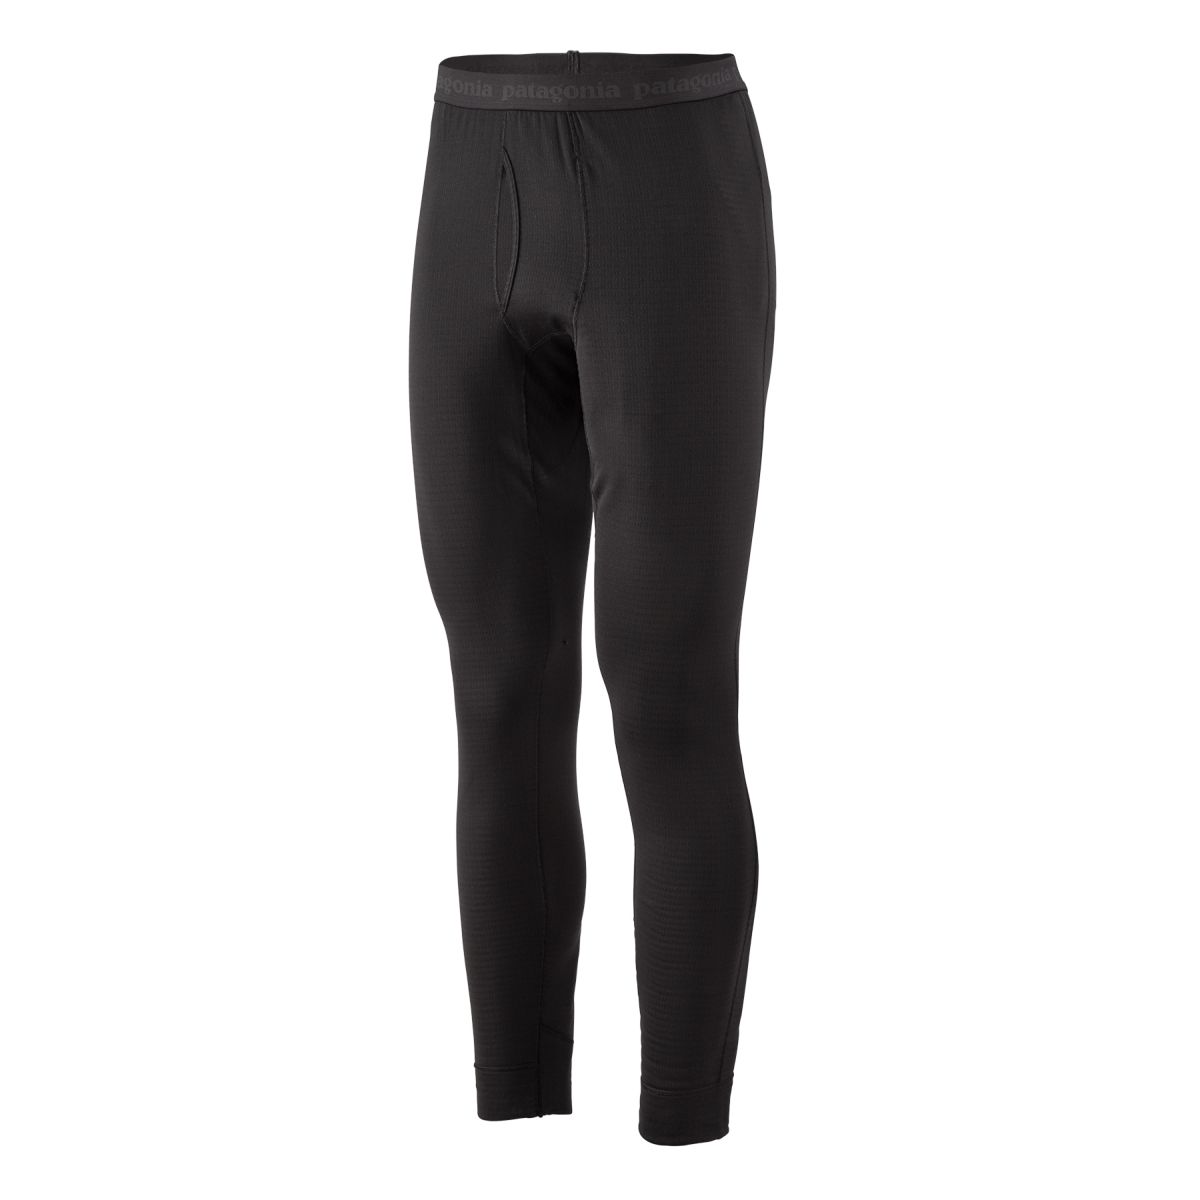 Capilene Thermal Weight Bottoms - Men's from Patagonia